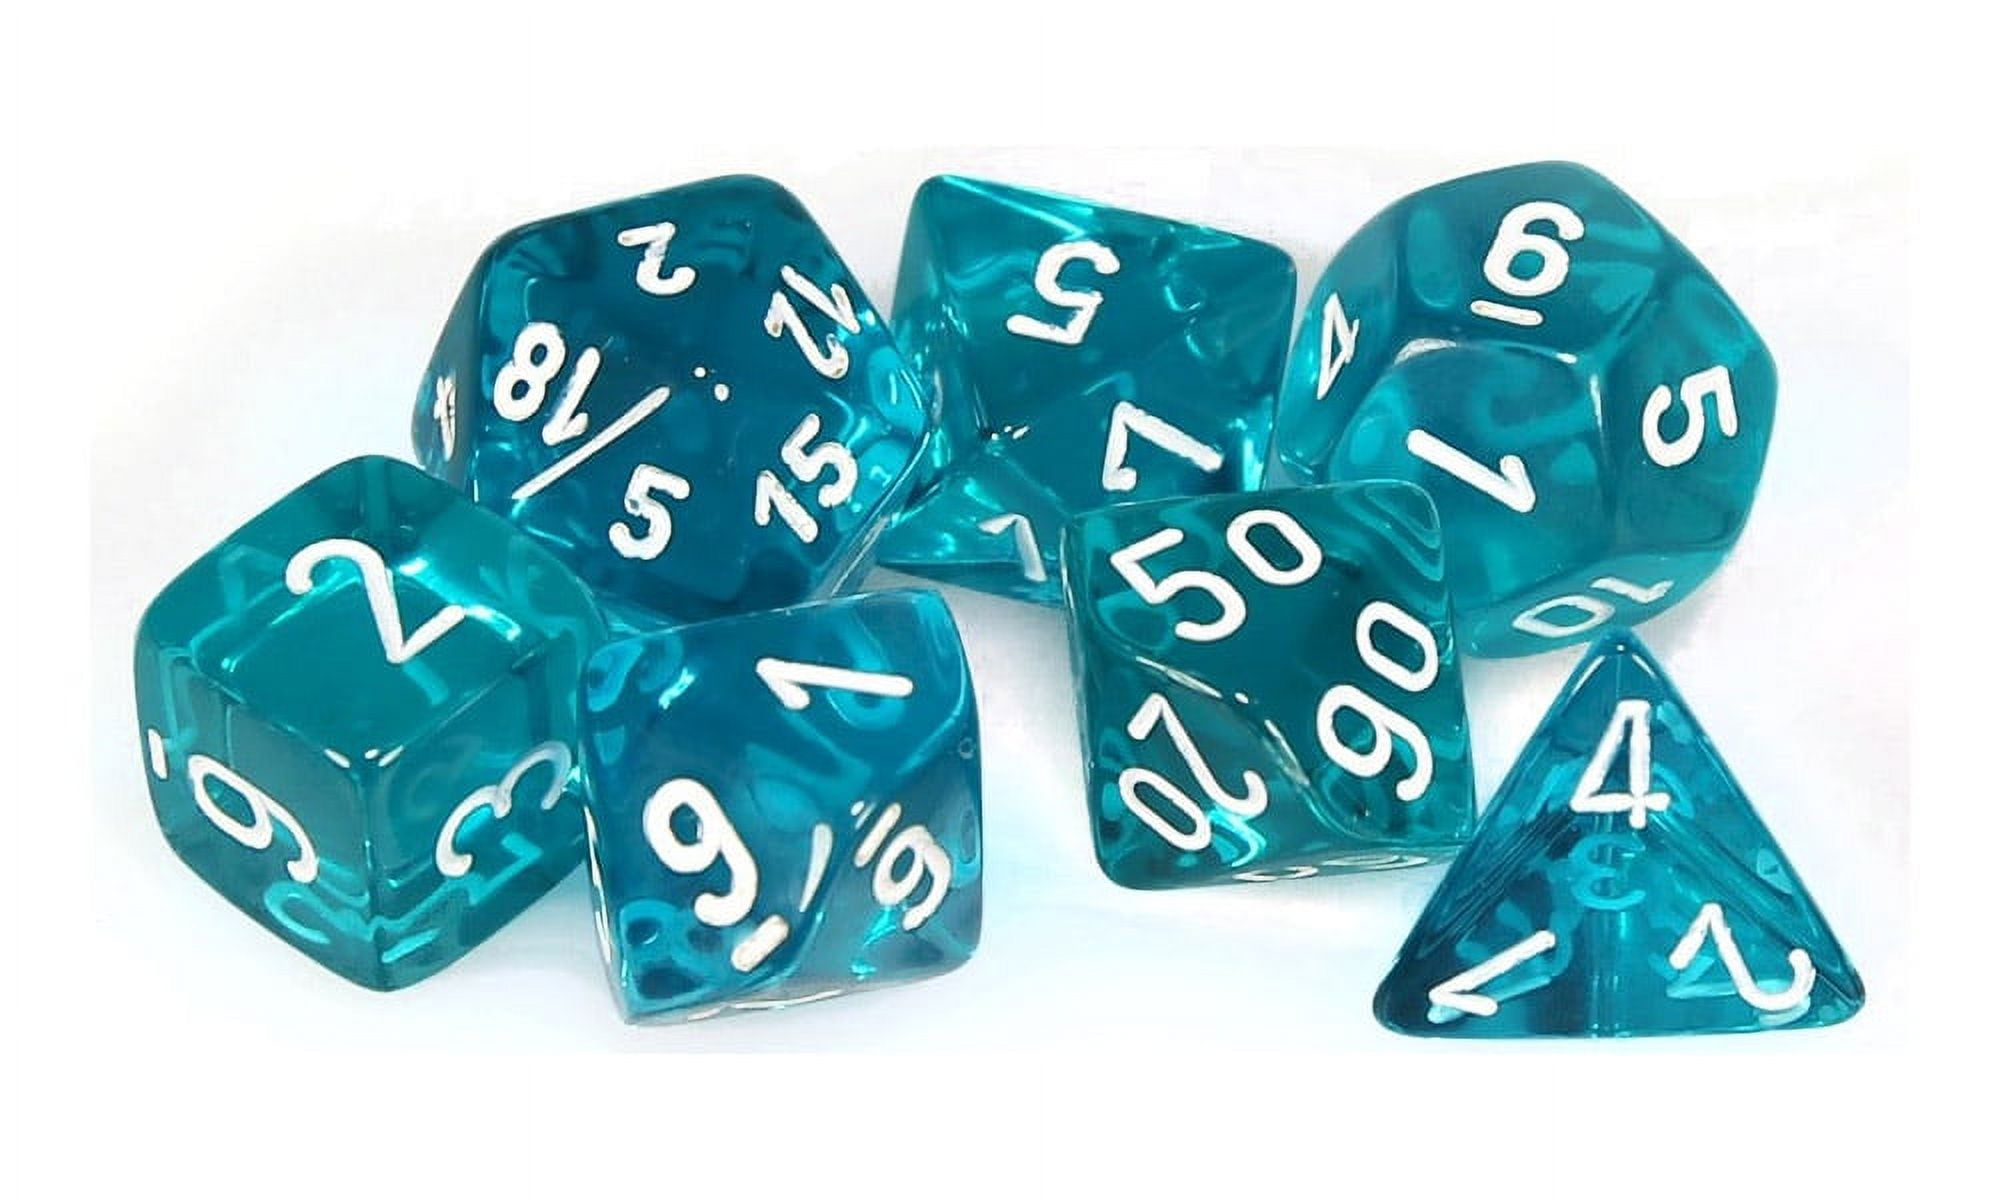 Manufacturing Chx23085 Teal Translucent Dice With White Numbers - Set Of 7